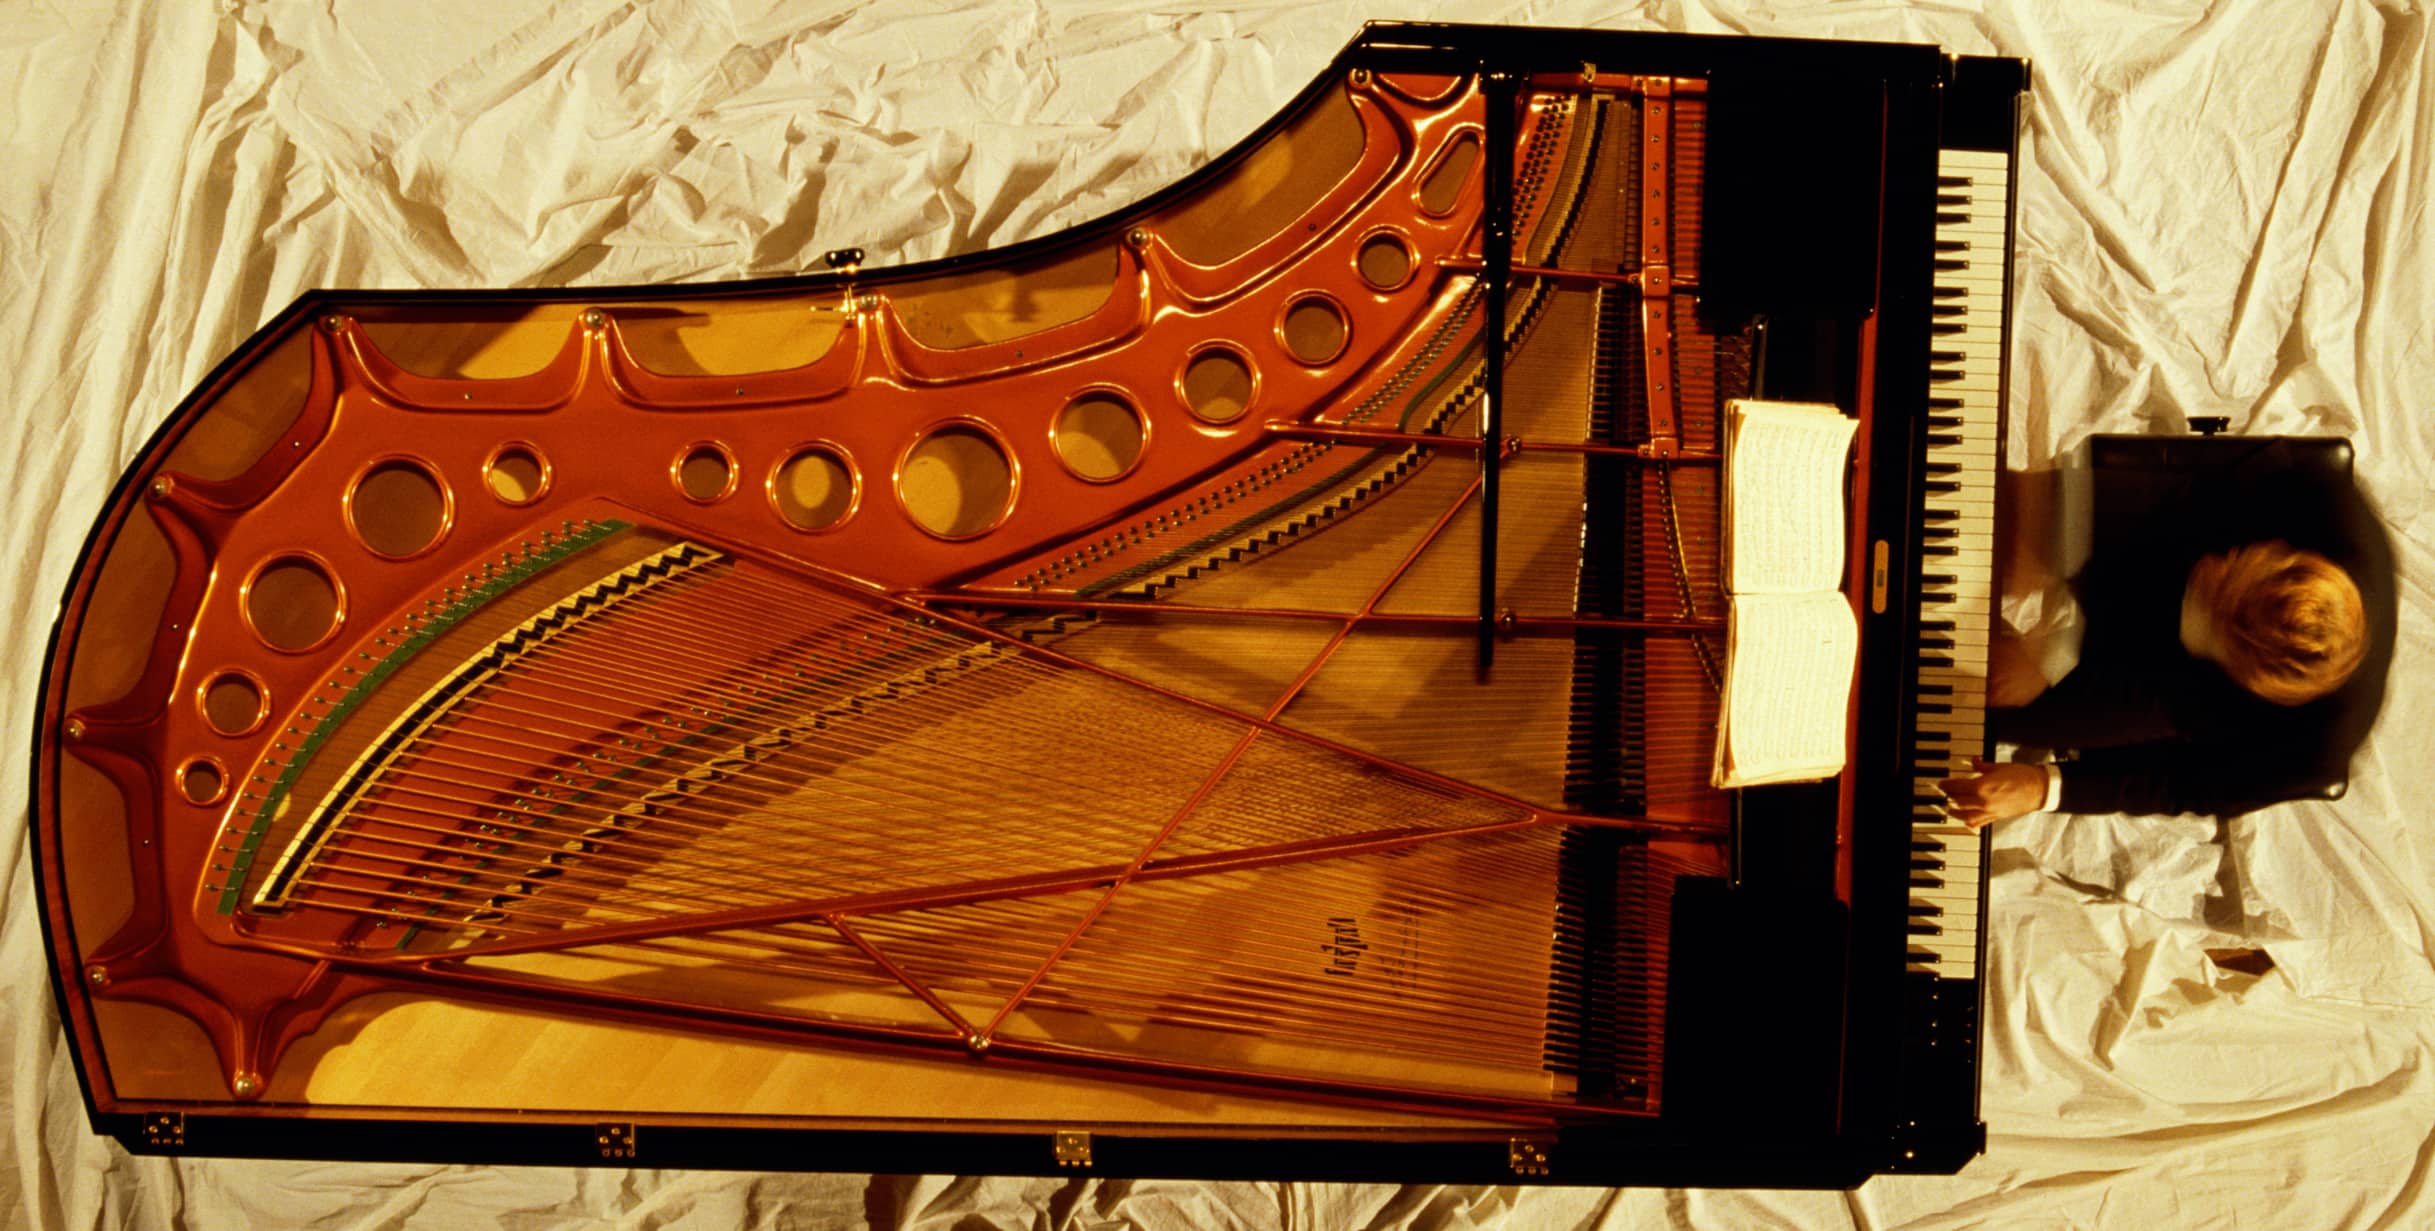 Inside of concert grand piano showing strings and soundboard to illustrate how grand pianos work